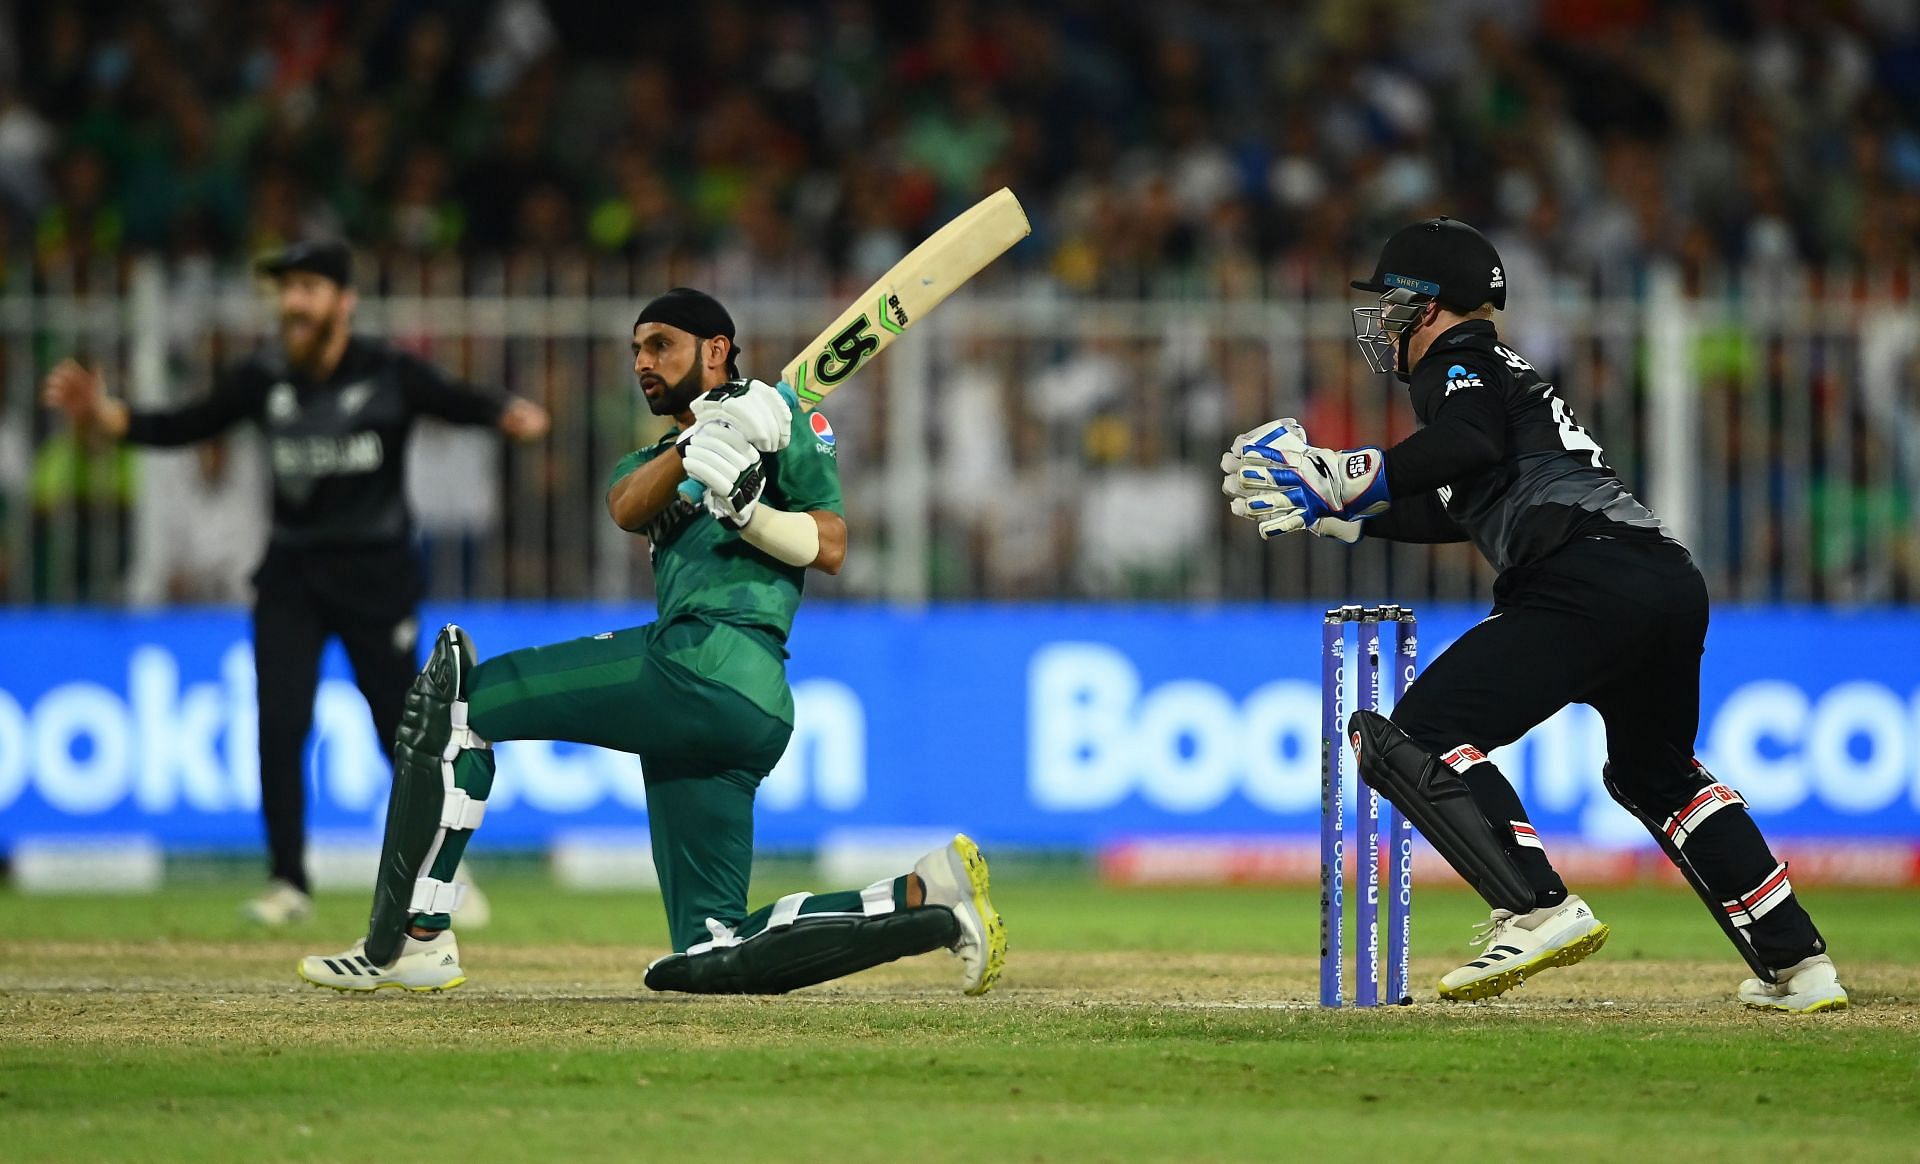 Shoaib Malik played a crucial knock of 26 against New Zealand in ICC T20 World Cup 2021